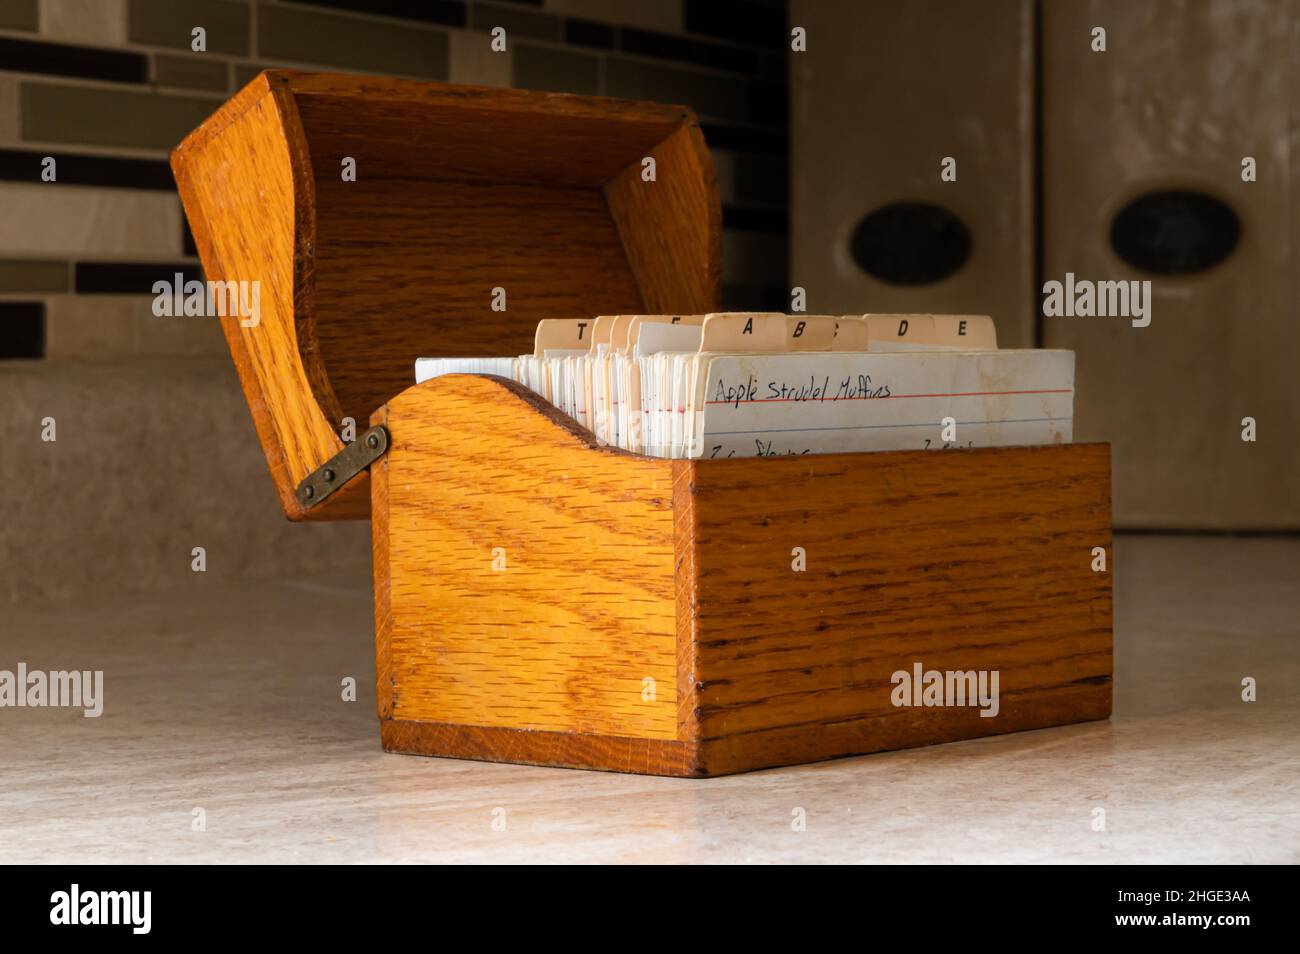 Wood recipe box on kitchen counter with hand written recipes Stock Photo